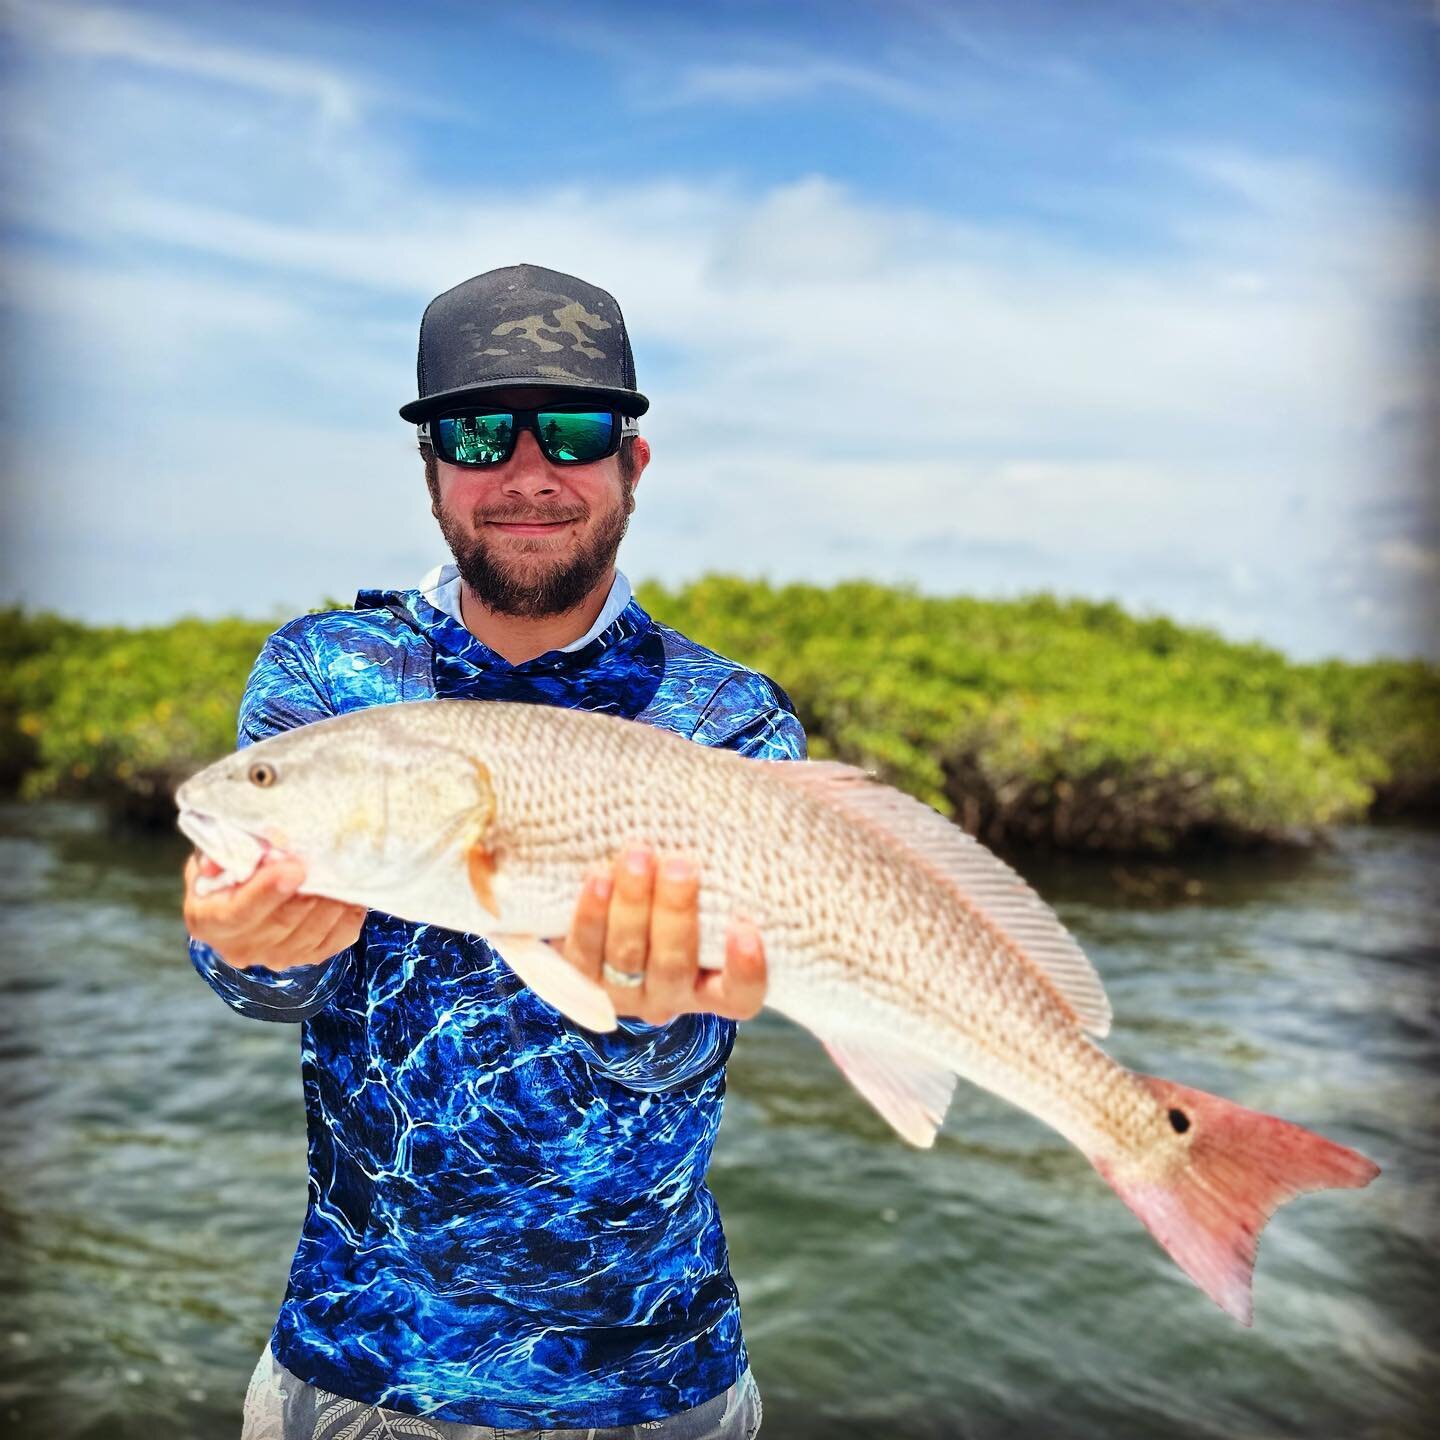 Put some big ones today with Luke and his crew. #crystalriver #captjameskerr
#crystalriverflatsfishing #fishing #naturecoast #seatrout #snook  #visitflorida #sodiumfishinggear #crystalriverfishing #inshorefishing #redfish 

www.crystalriverflatsfishi